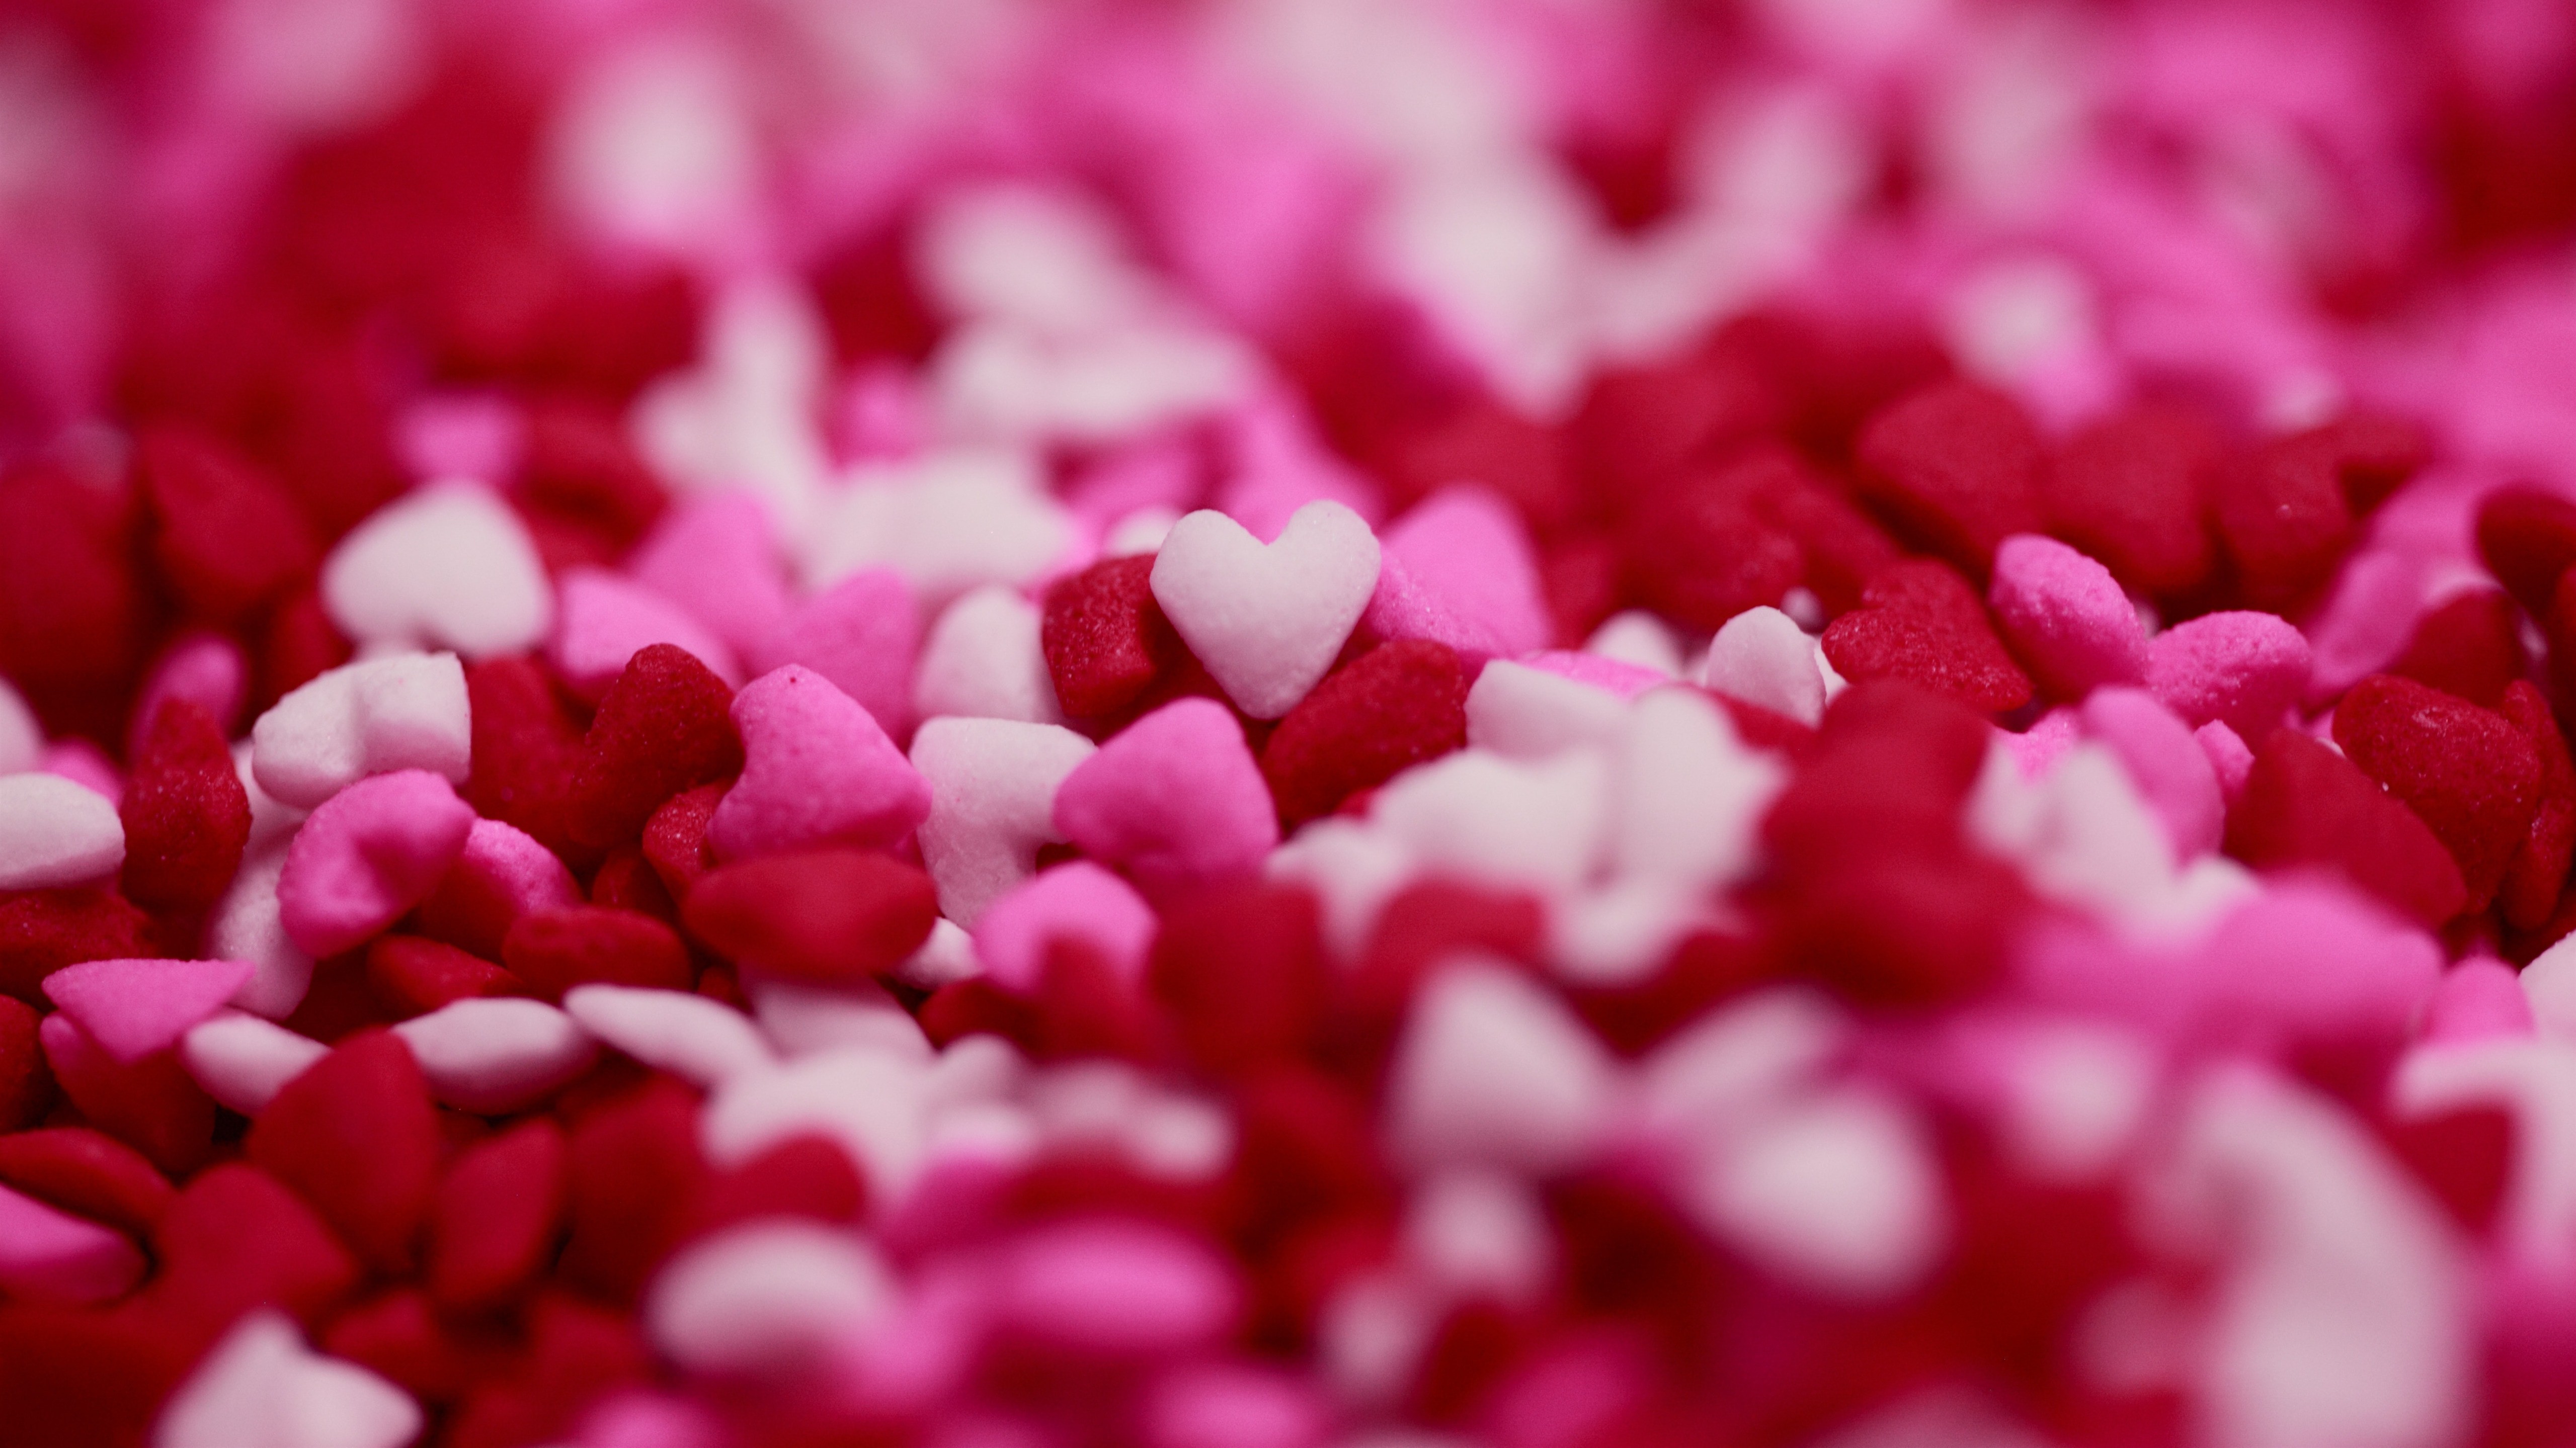 Valentines Day in Colorful Heart Sprinkles 5K Wallpaper. HD